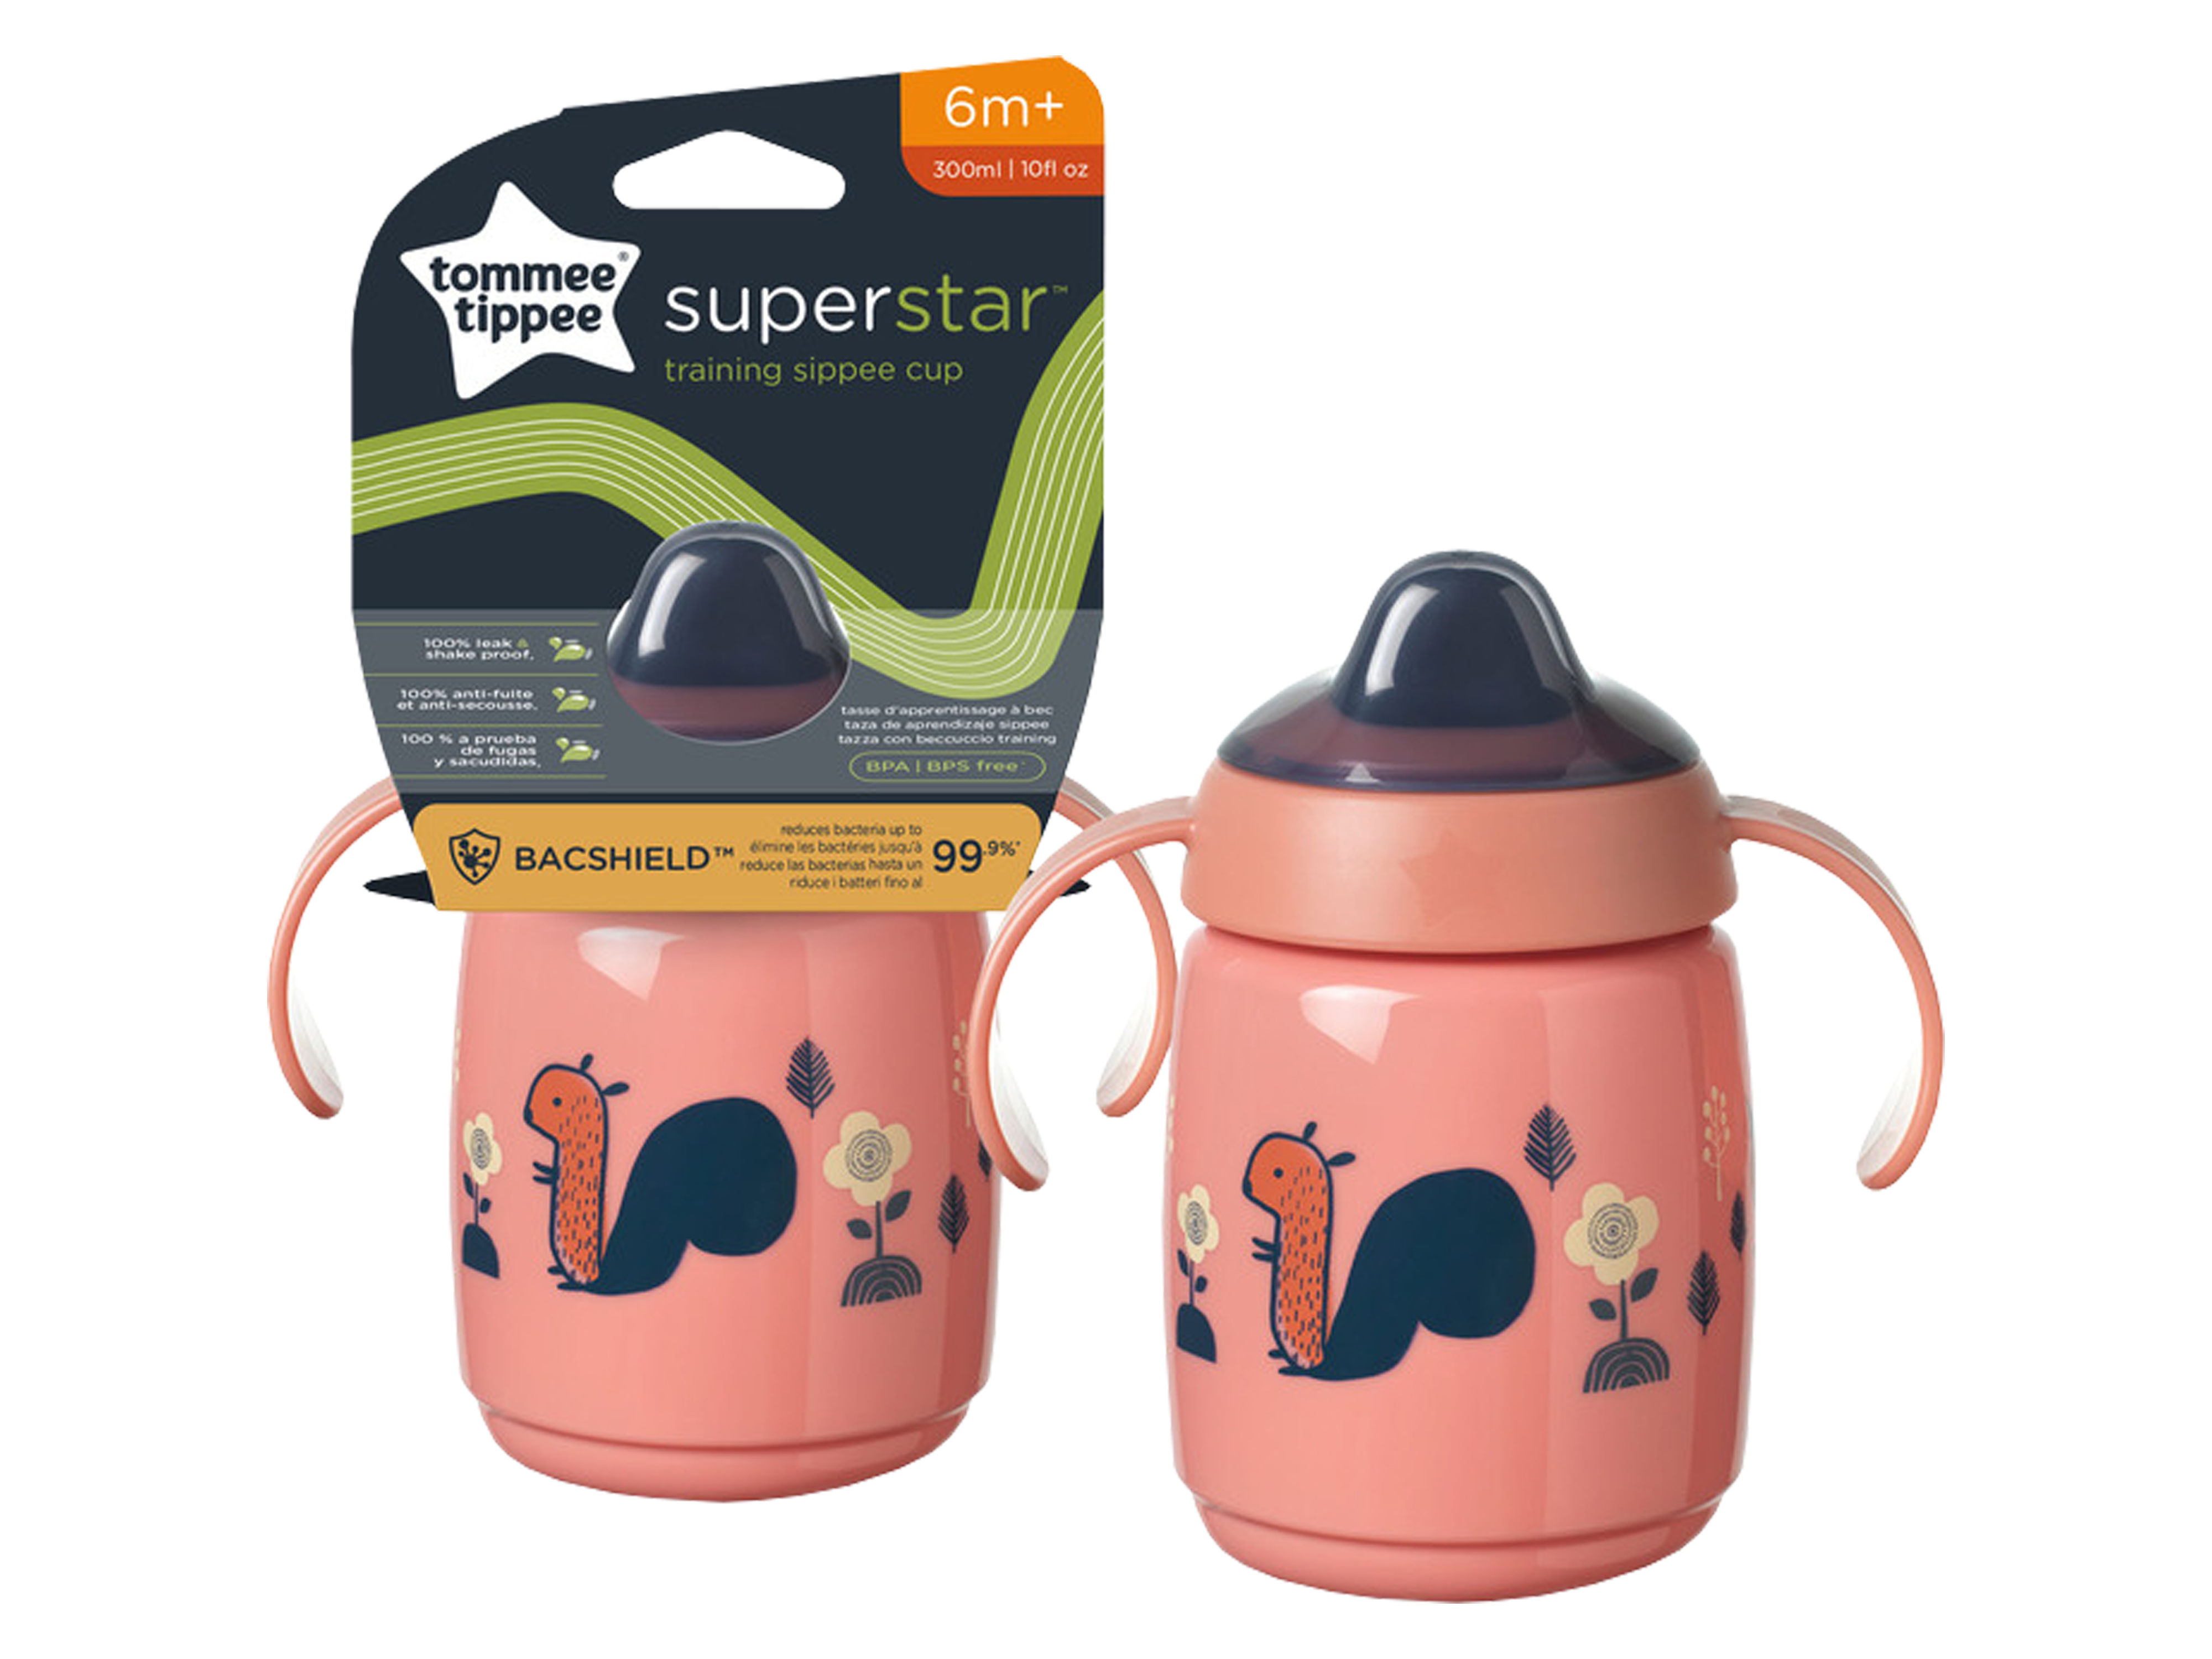 Tommee Tippee Superstar Sippee Cup 6md+, Rosa, 1 stk.